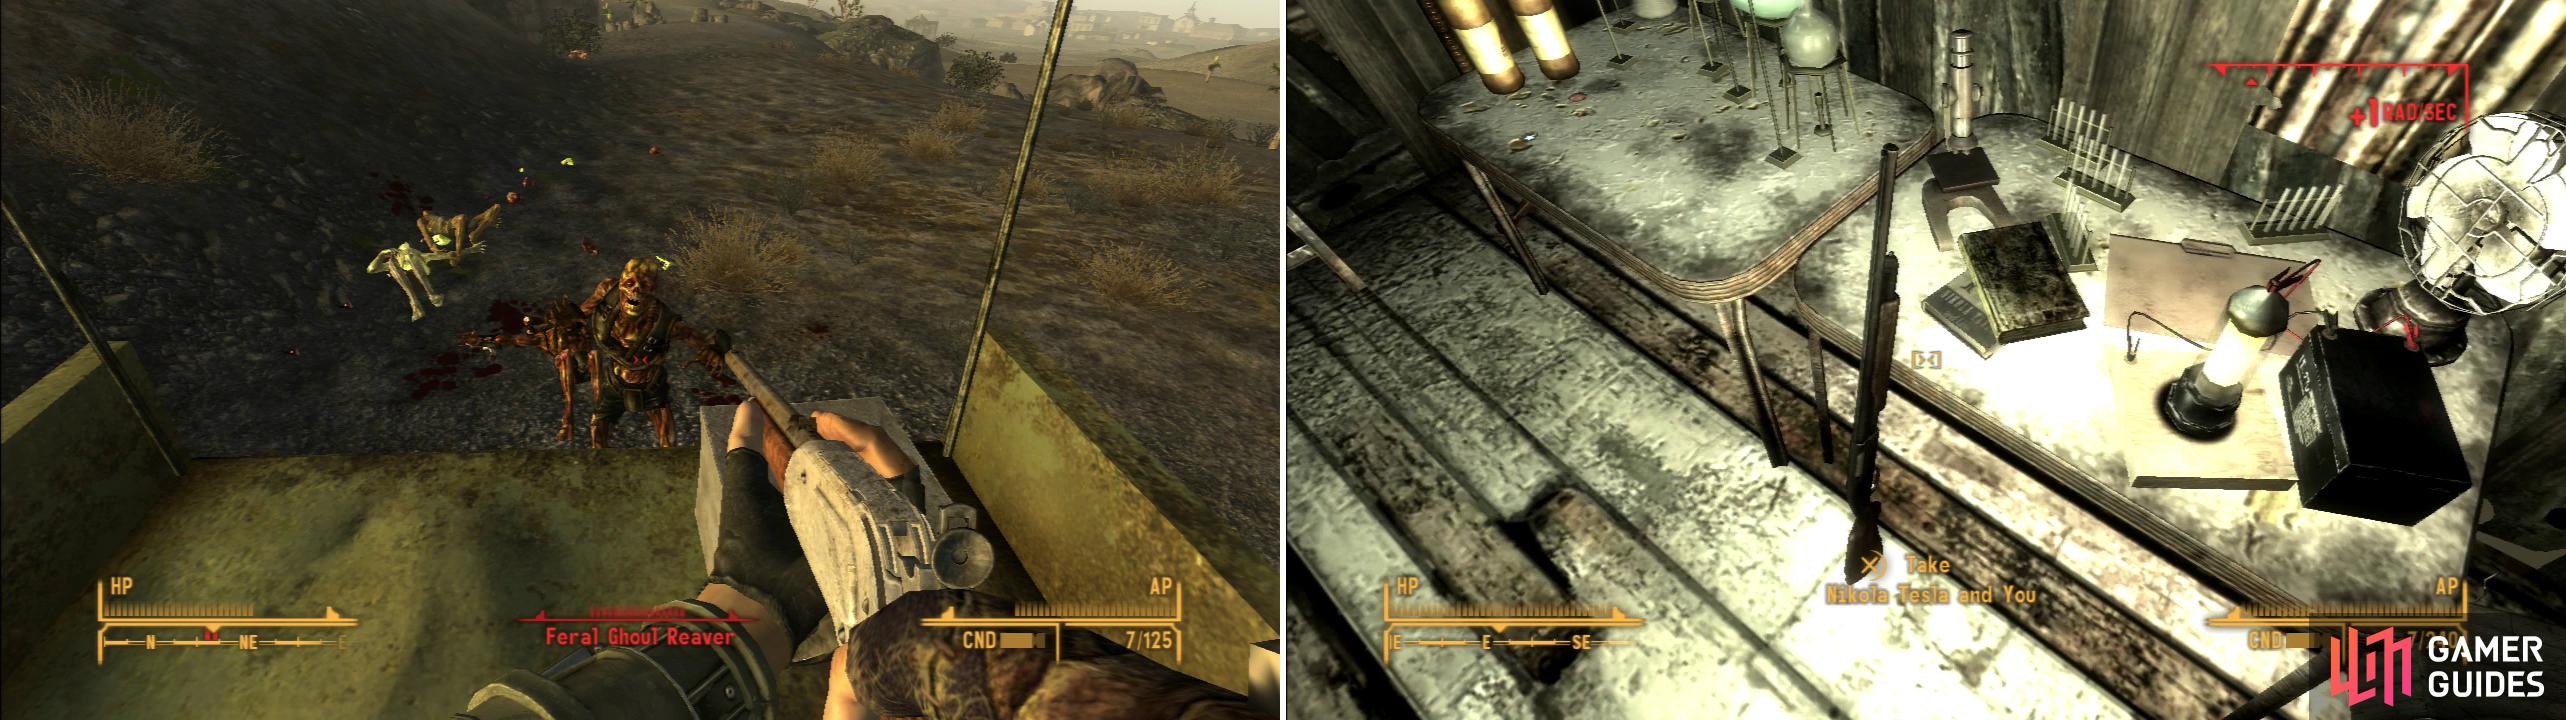 You can safely (cheaply) fight the Ghouls near the Old Nuclear Test Site by firing from the back of a truck (left). Inside a shack you can find some nice loot, including a copy of Nikola Tesla and You (right).